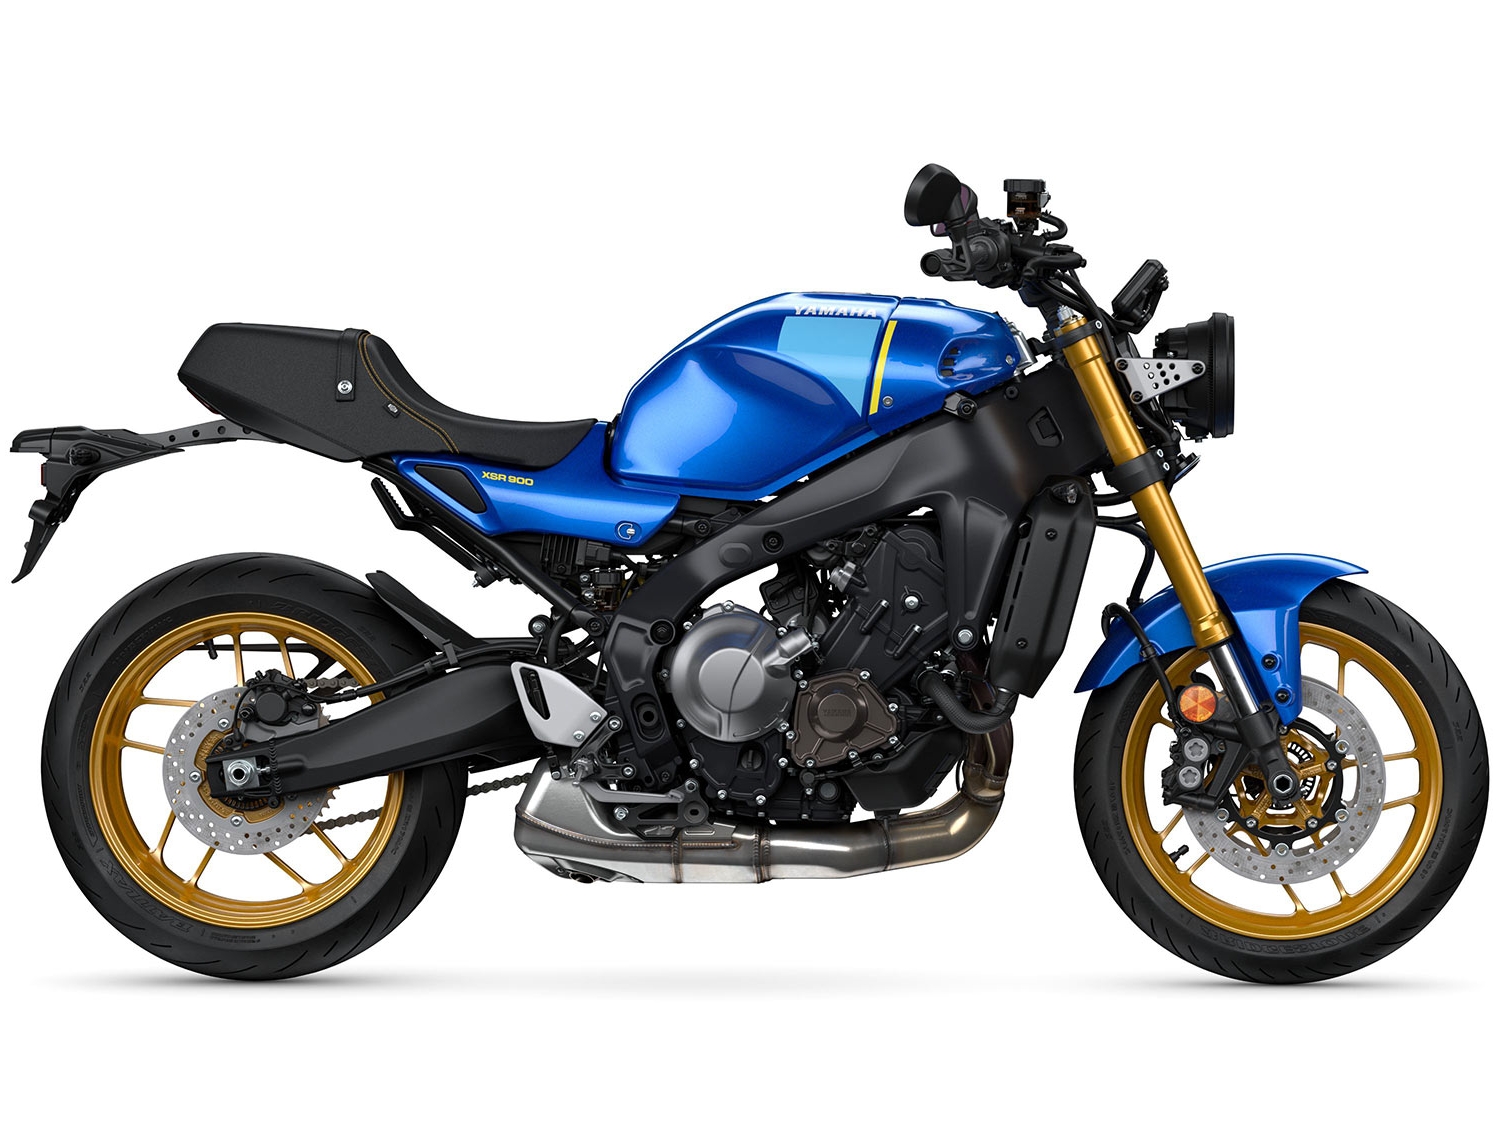 Yamaha MT-07 vs Suzuki GSX-8S: who's king of the middle